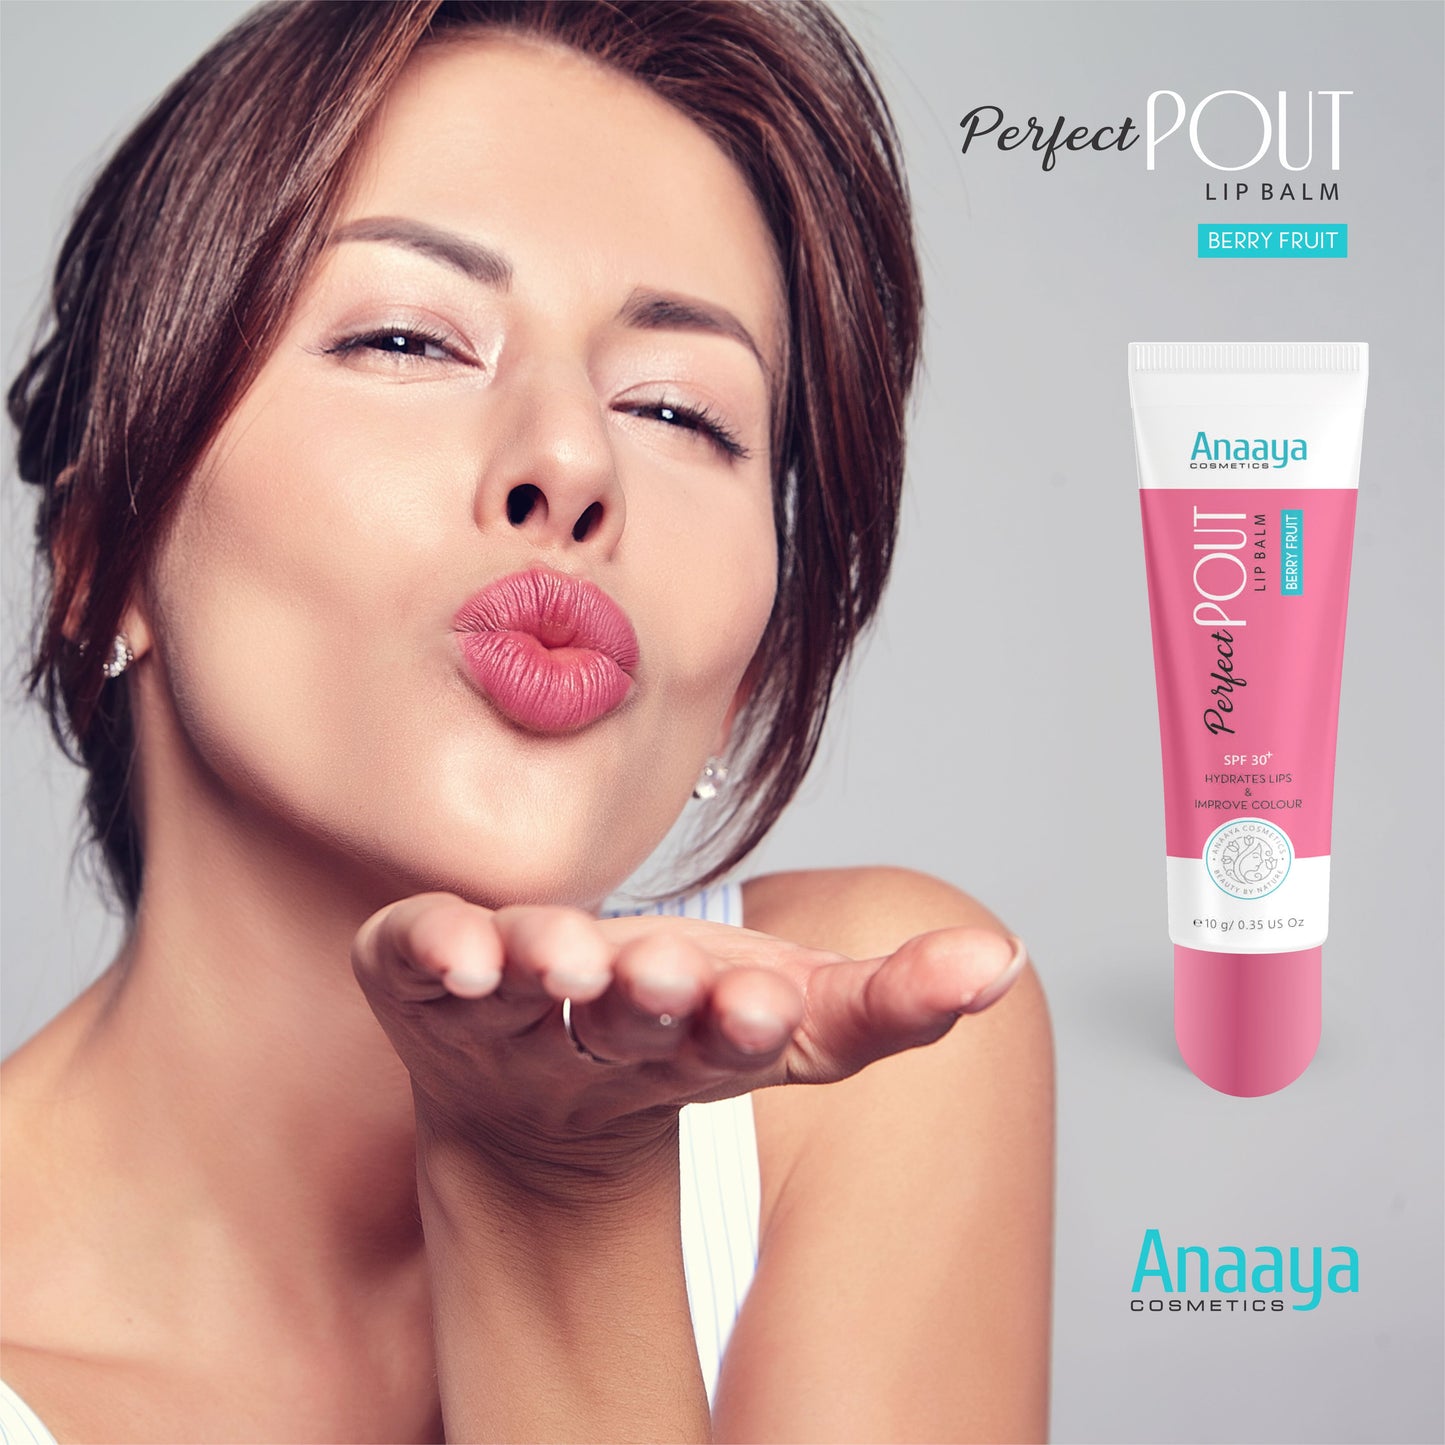 Anaaya Perfect Pout Lip Balm SPF 30 Enriched with Shea and Cocoa Butter Berry Fruit